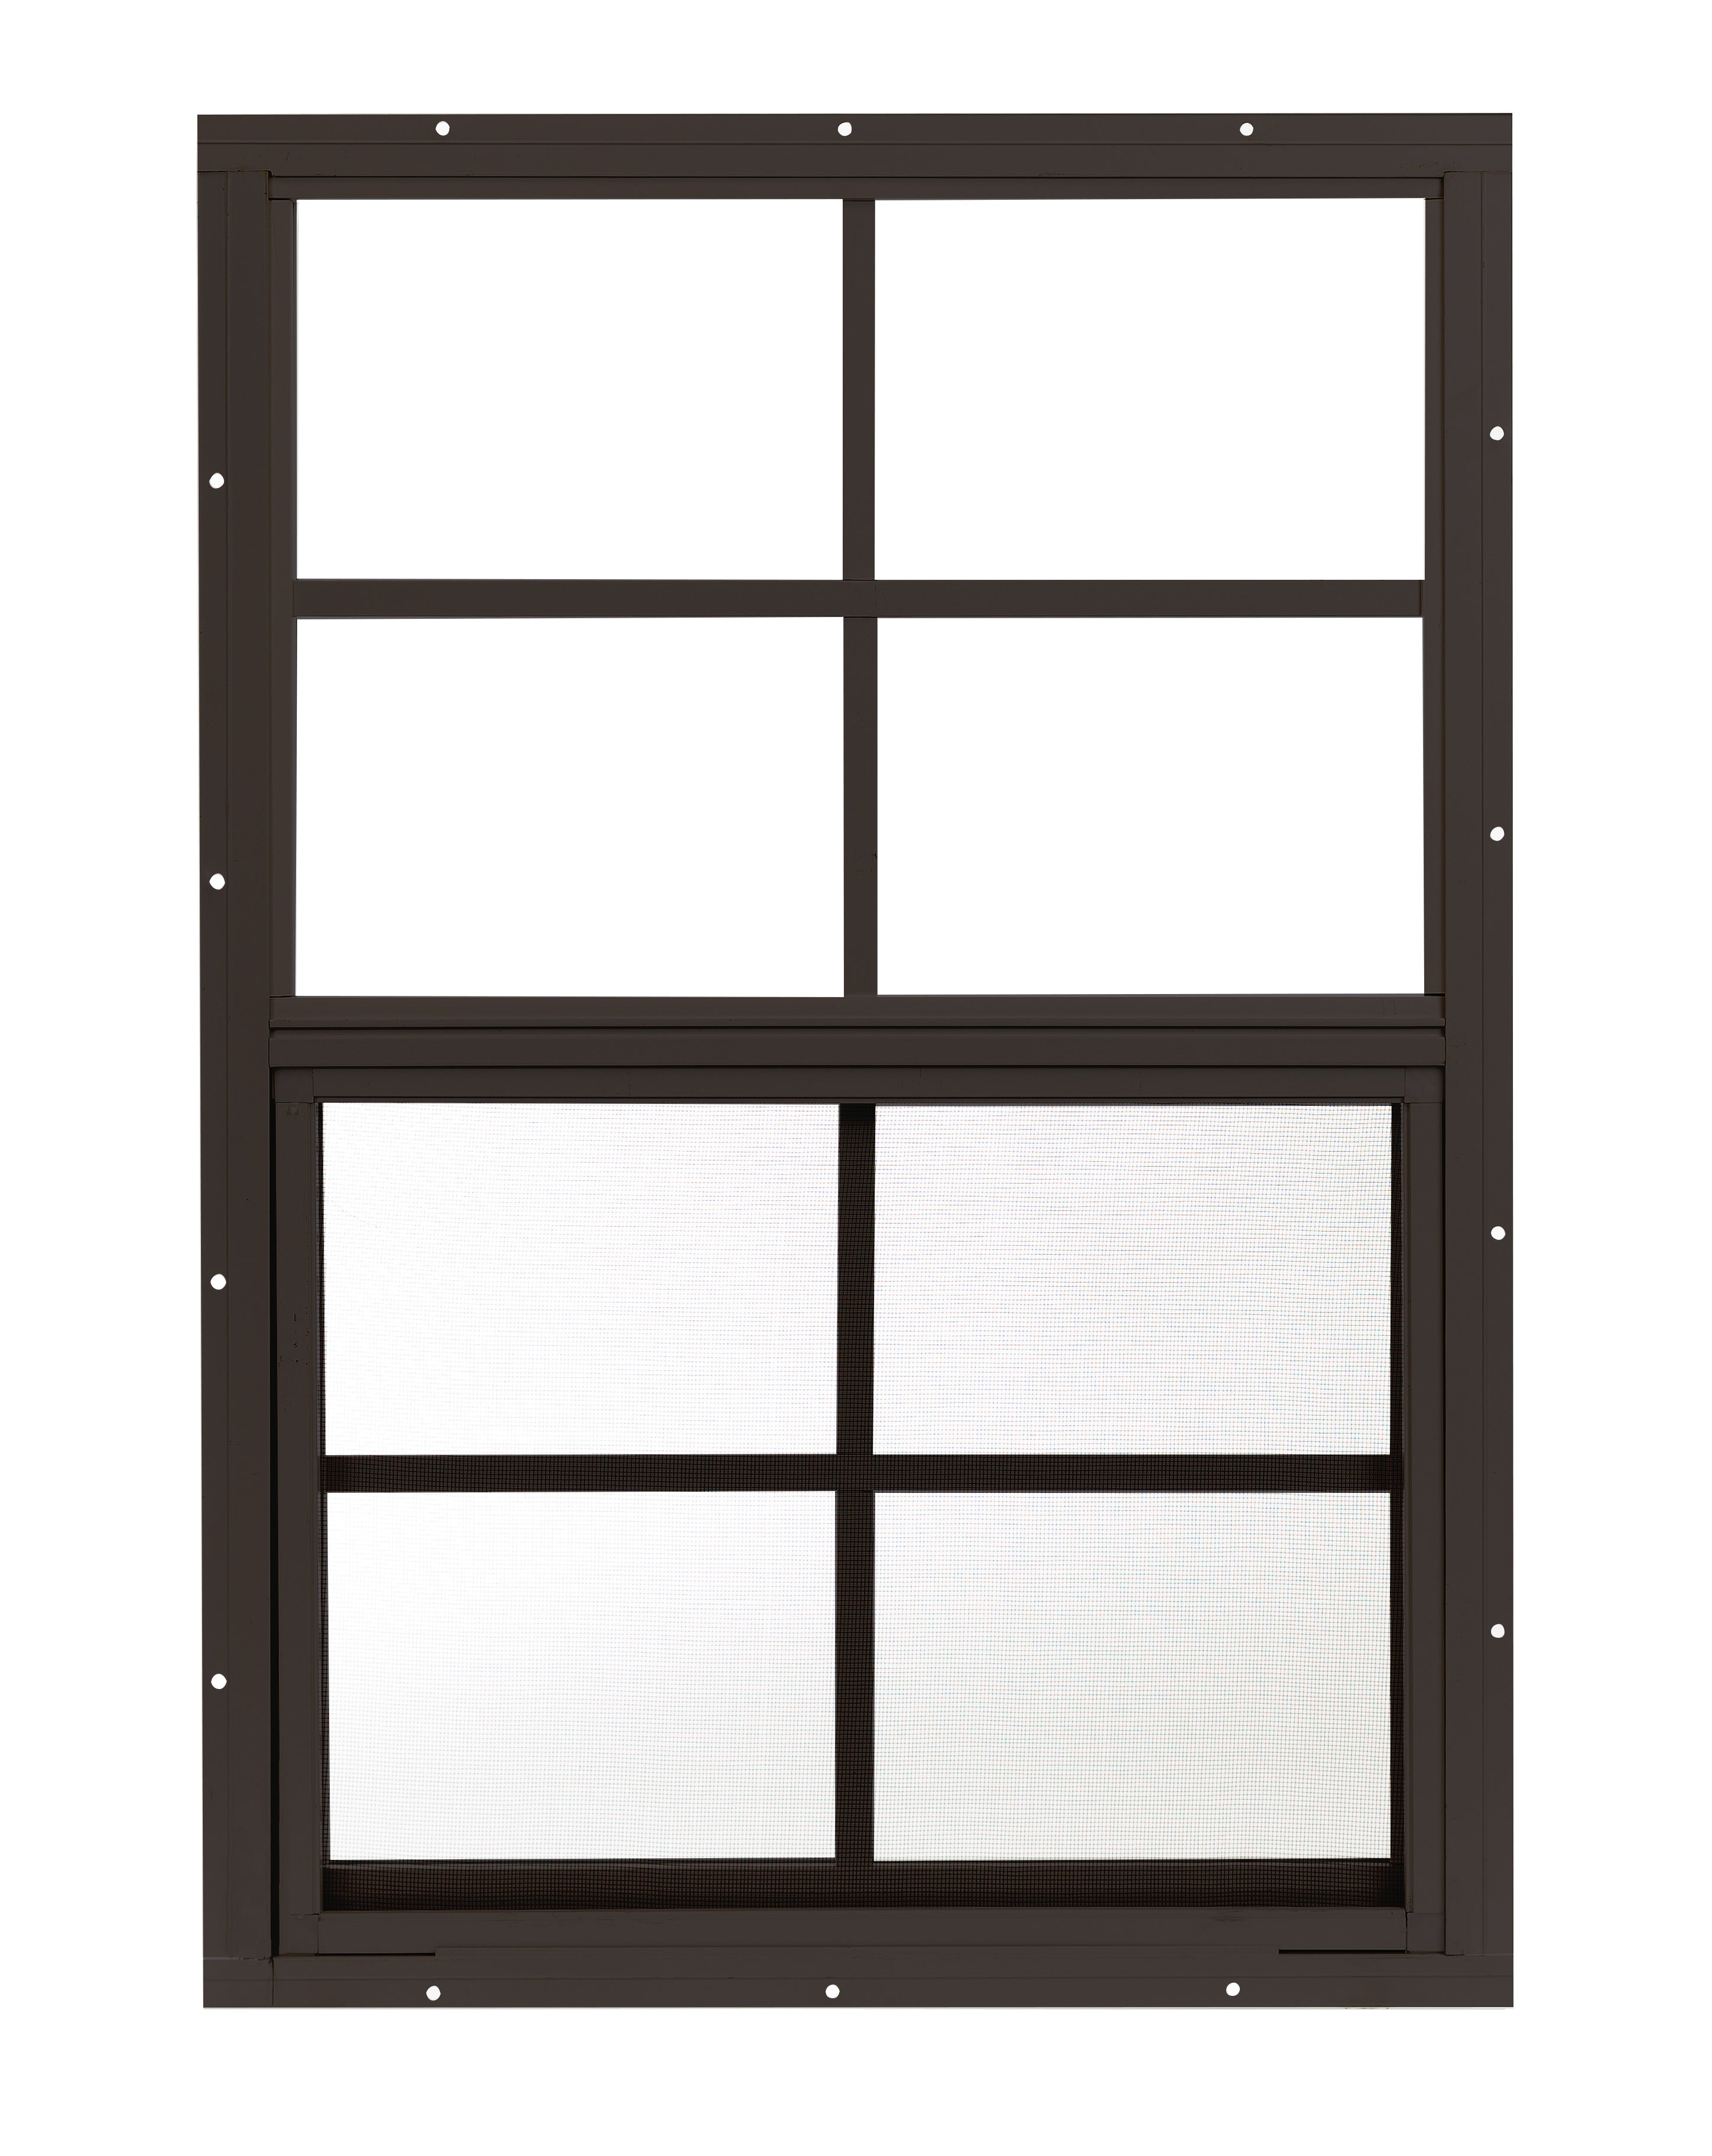 18" W x 27" H Single Hung Flush Mount Brown Window  with Grids for Sheds, Playhouses, and MORE